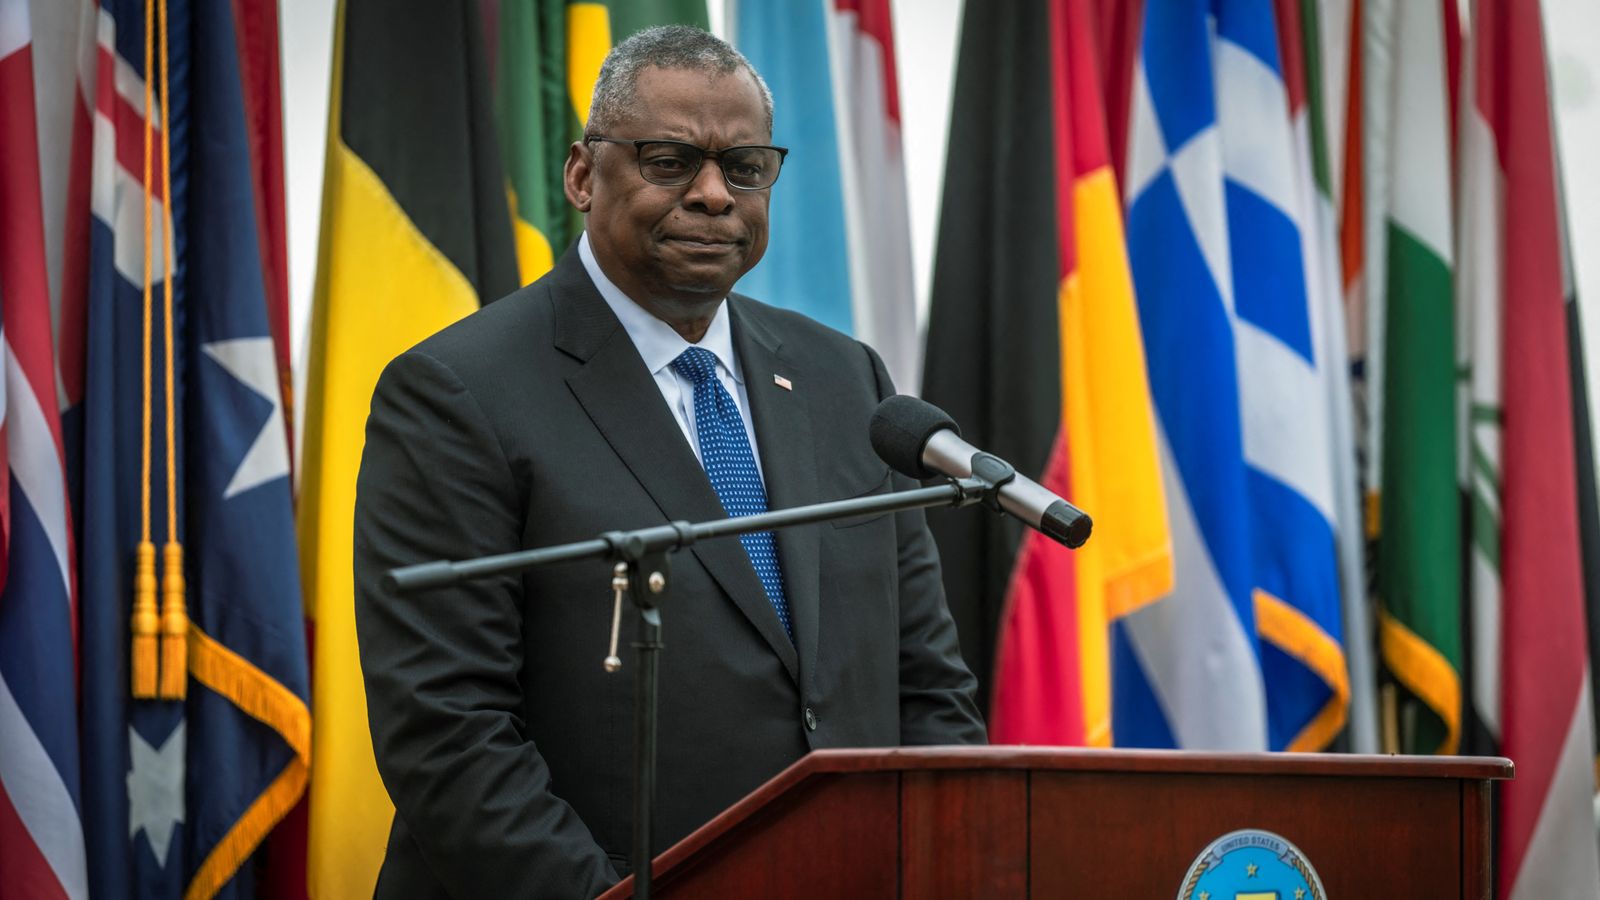 US Defence Secretary Lloyd Austin remains in hospital with prostate cancer